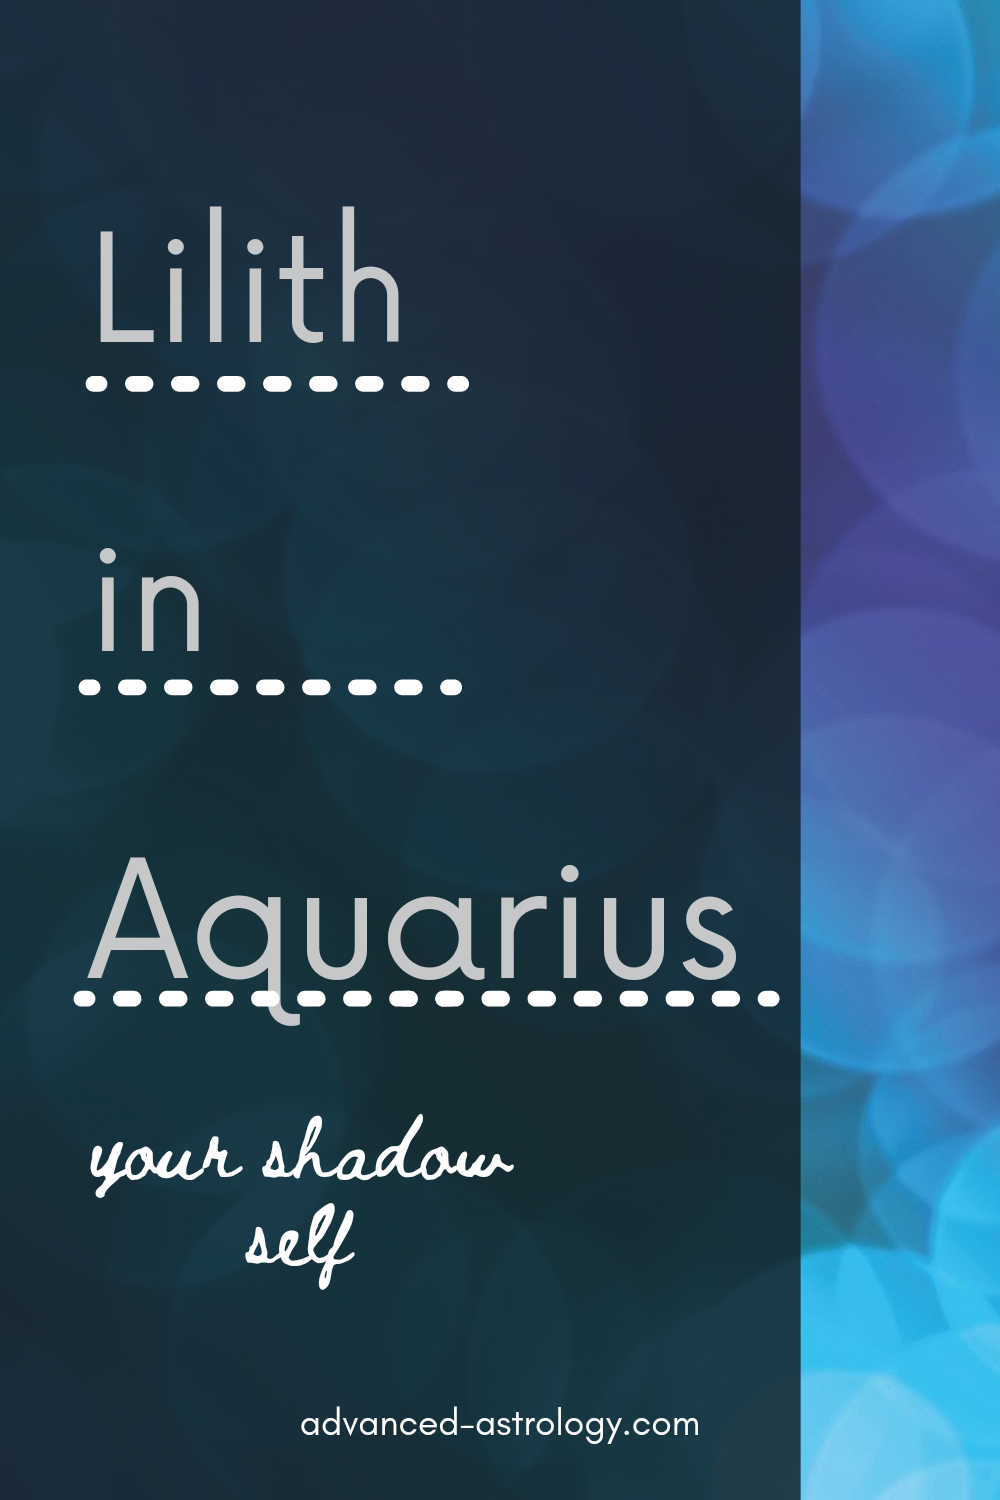 allure what does lilith mean in astrology